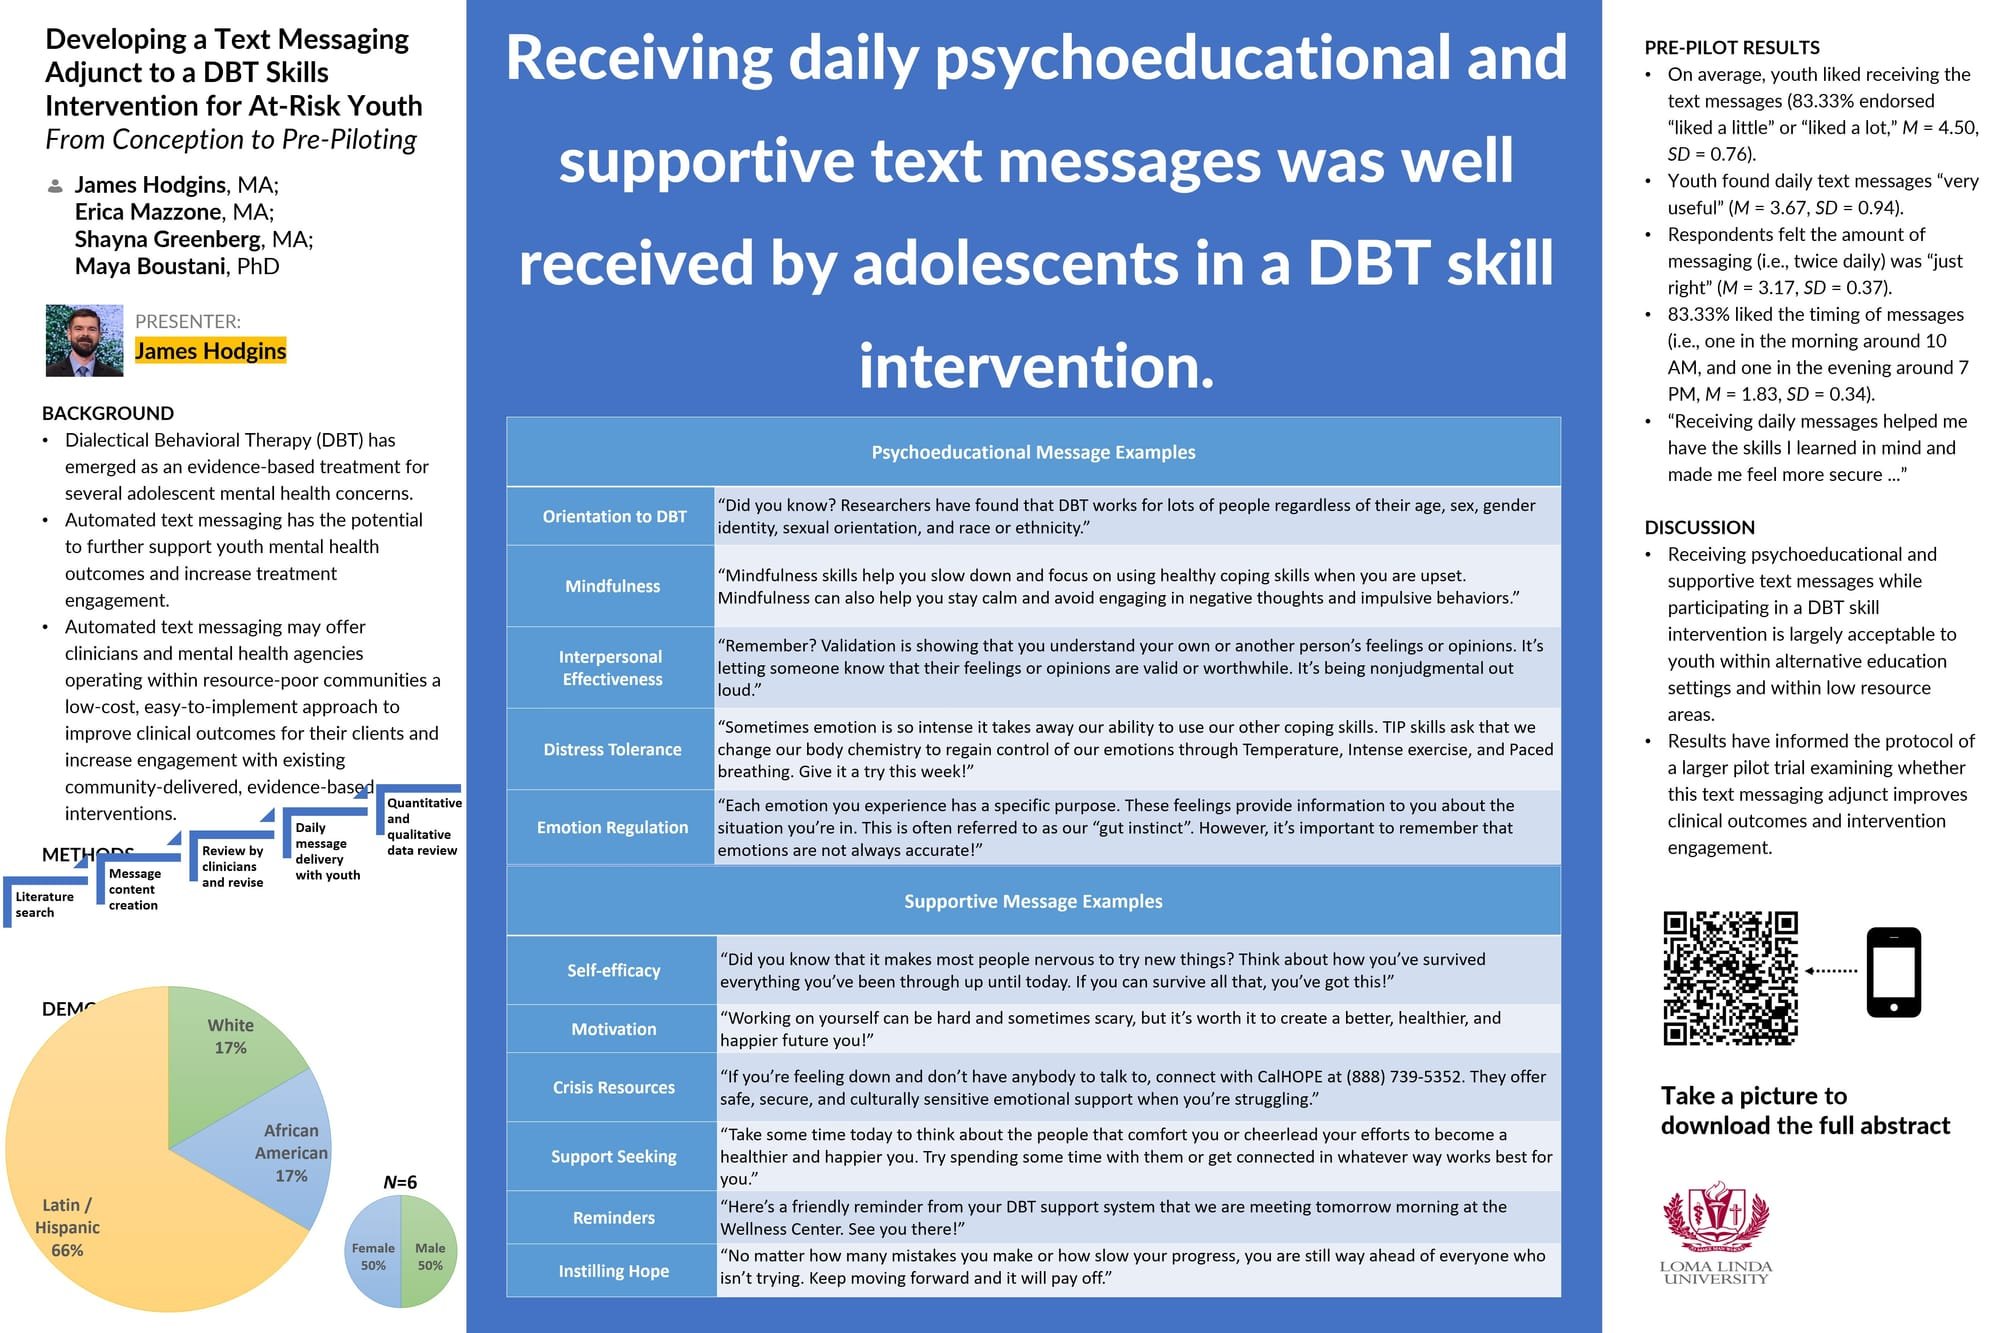 Developing a Text Messaging Adjunct to a DBT Skills Intervention for At-Risk Youth​ From Conception to Pre-Piloting​